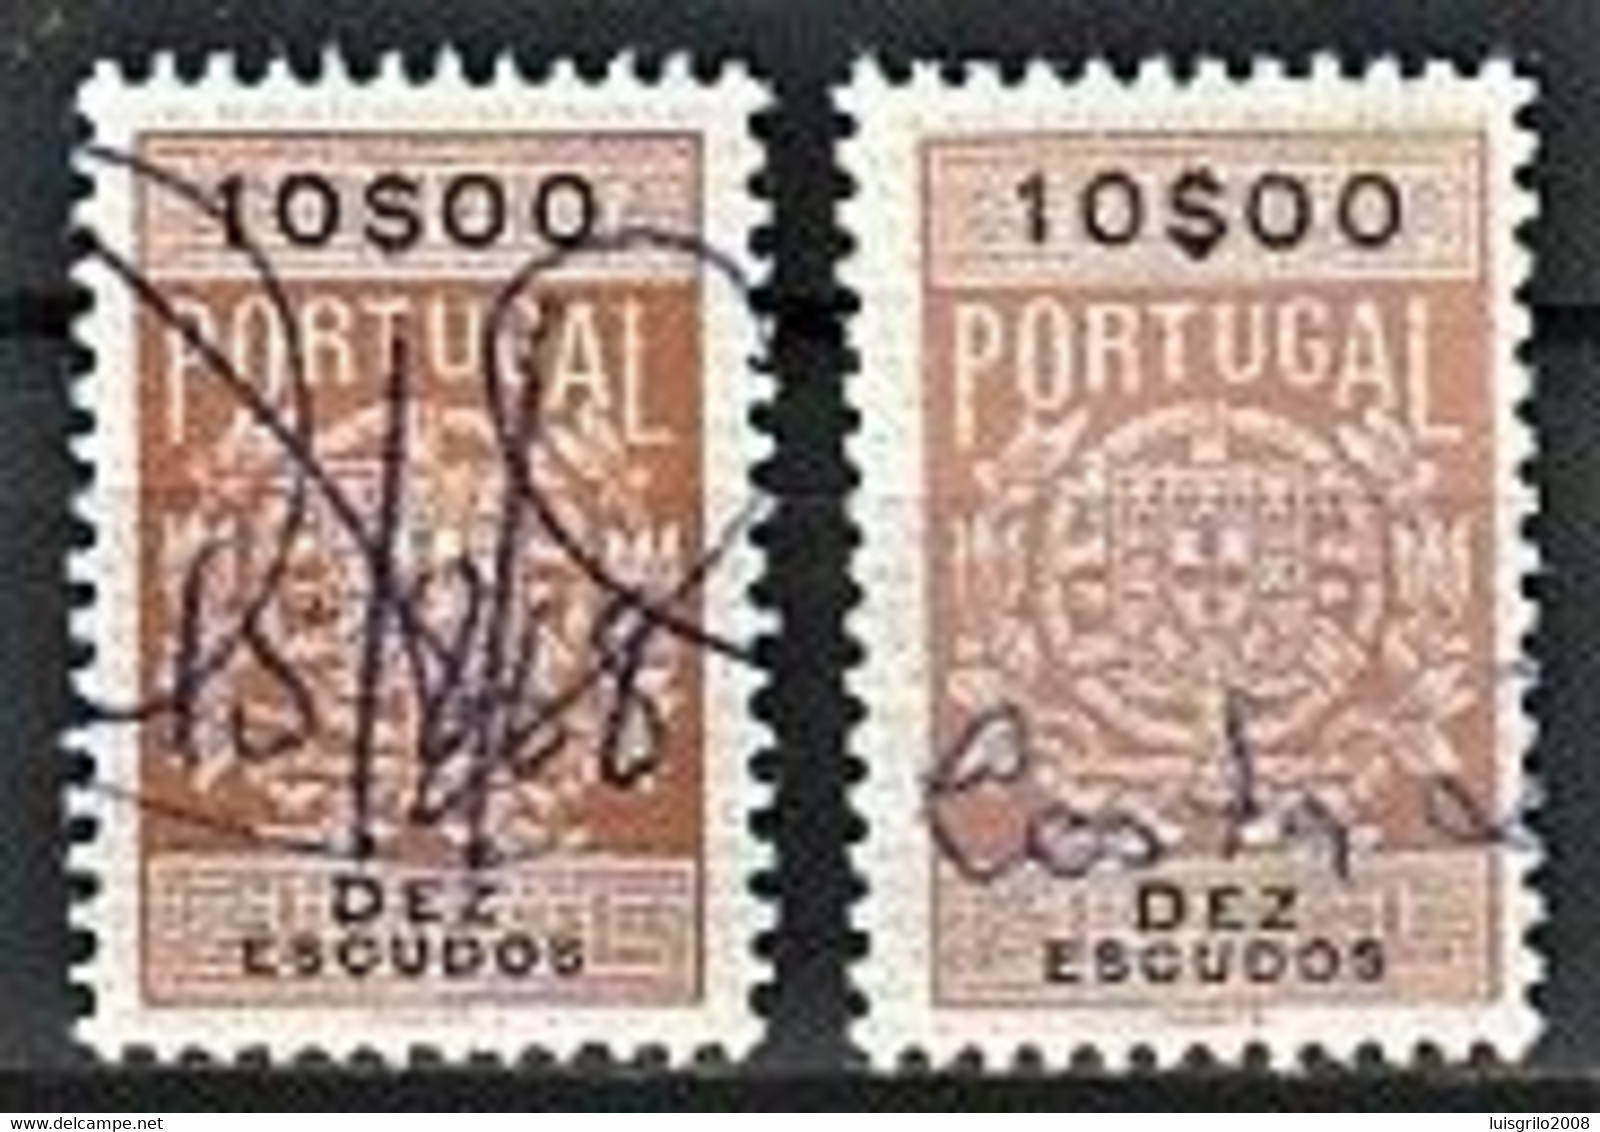 Fiscal/ Revenue, Portugal 1940 - Estampilha Fiscal -|- 10$00 - COLOR VARIANT - Is The Stamp Of The Right - Gebruikt